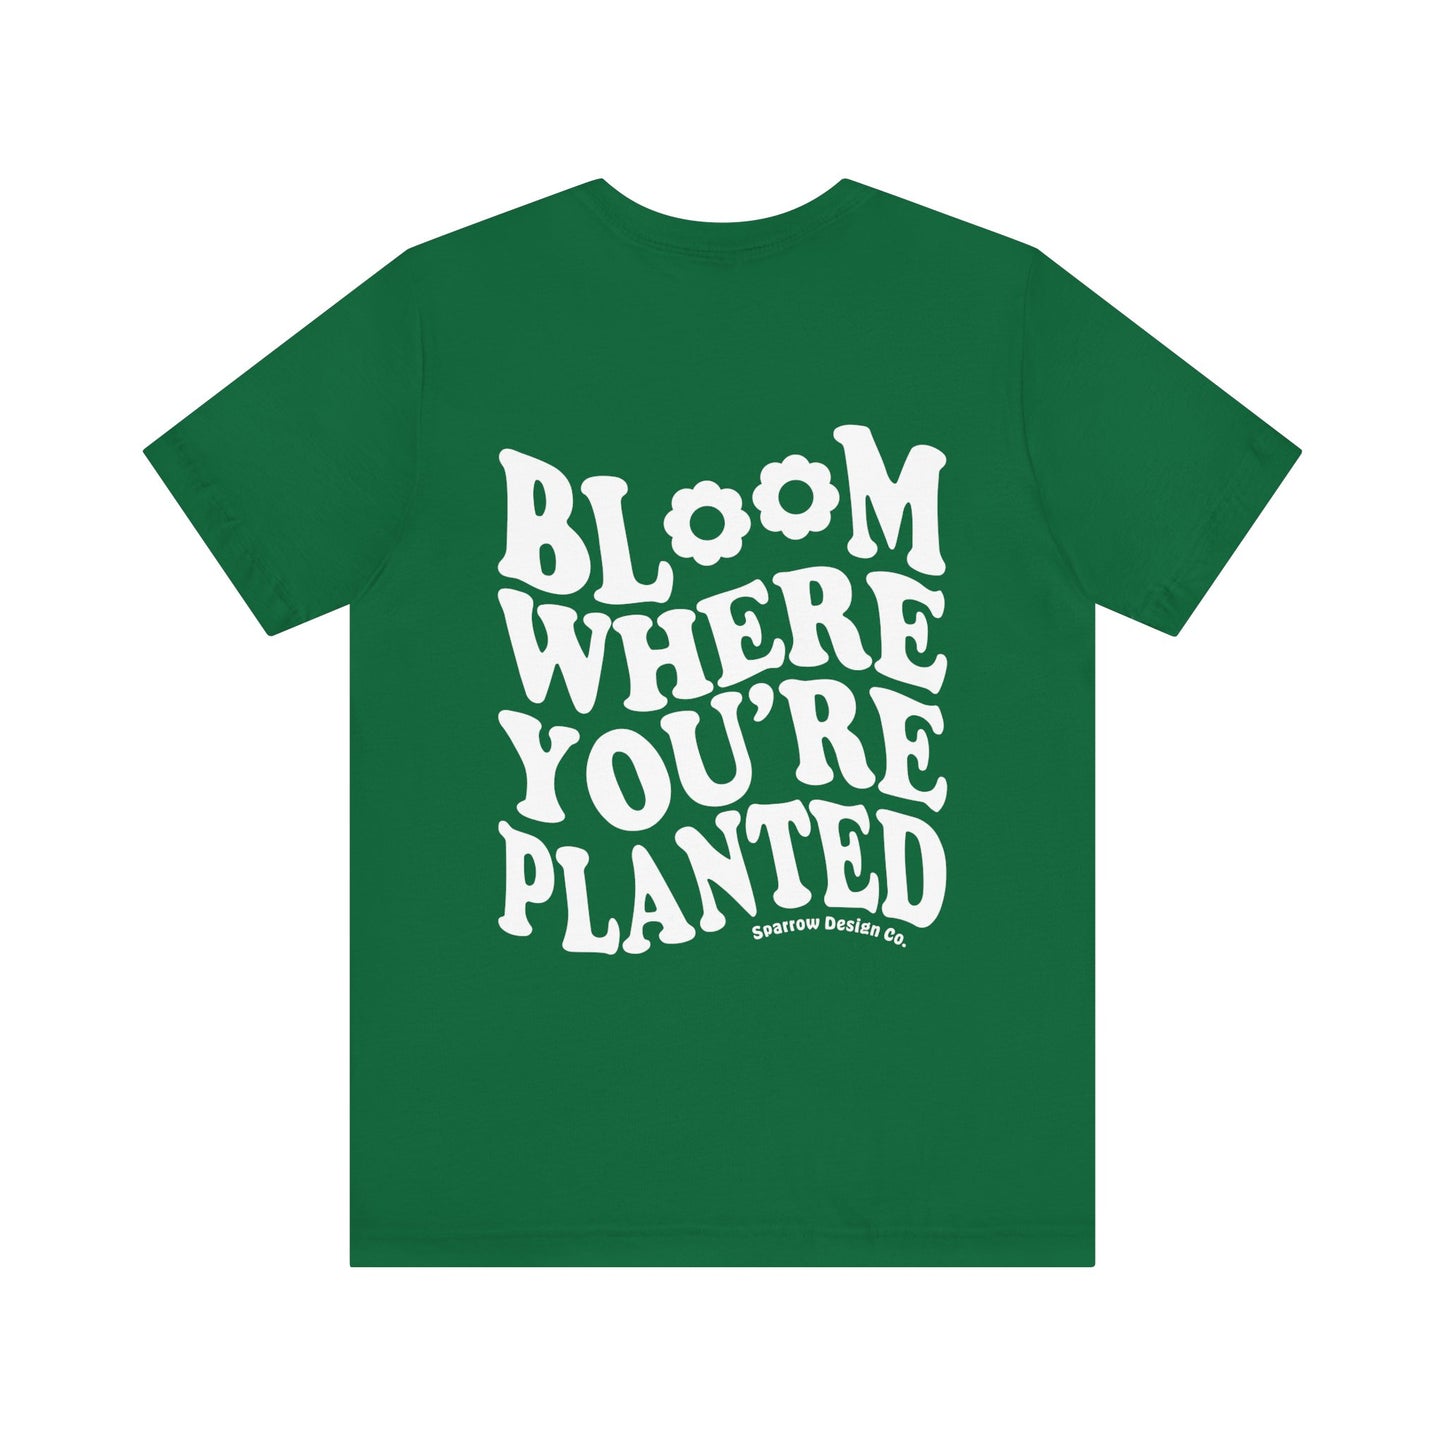 Bloom Where You're Planted Tee - Navy/Black/Kelly Green